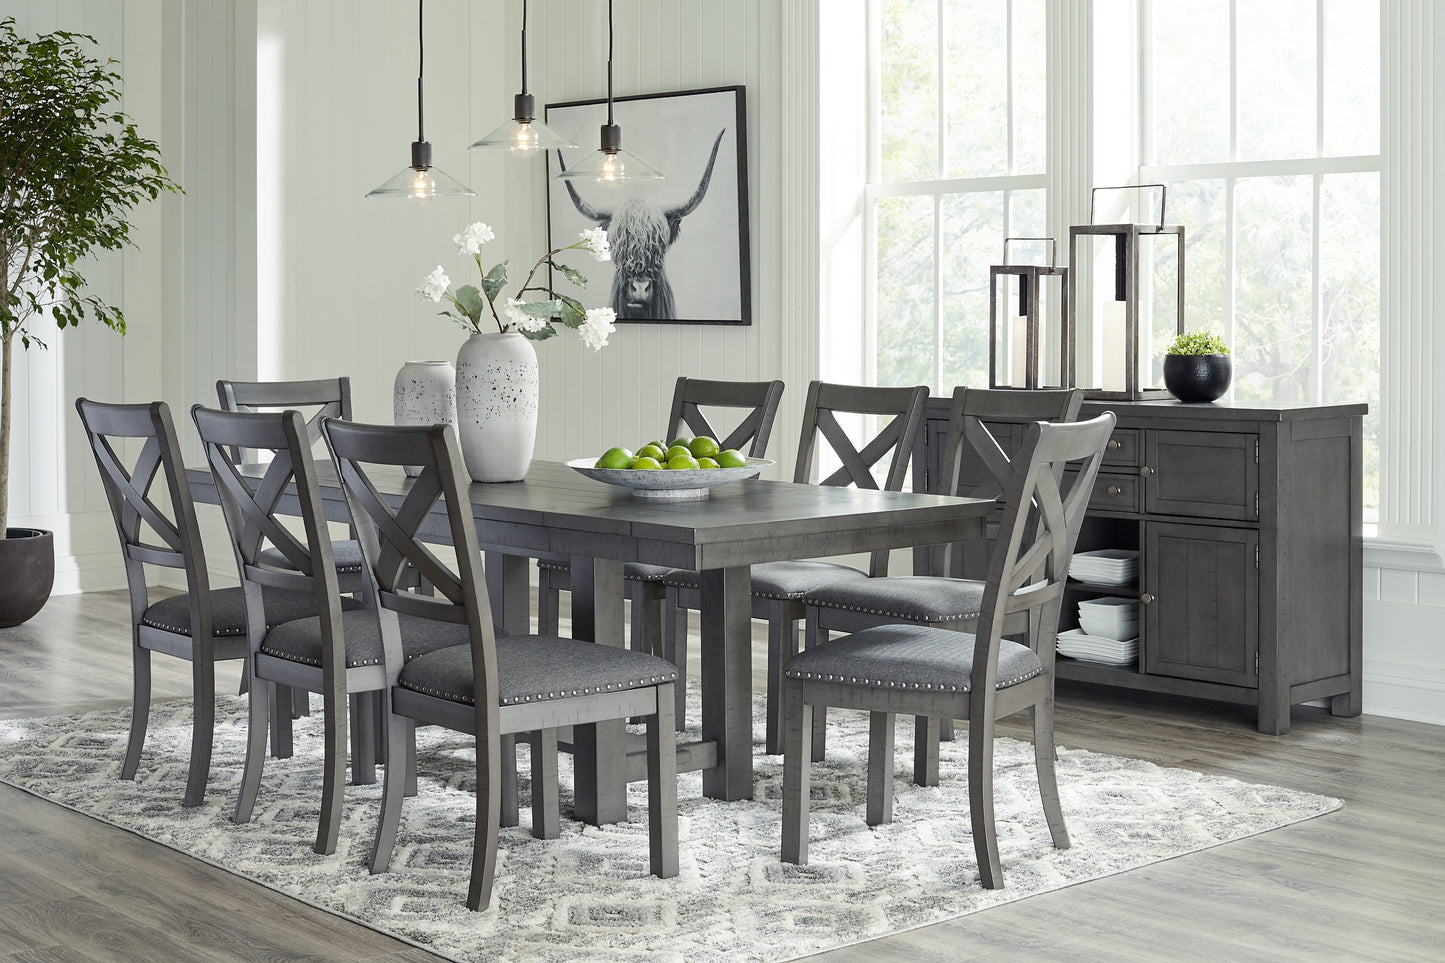 Myshanna Dining Table and 8 Chairs with Storage JB's Furniture  Home Furniture, Home Decor, Furniture Store